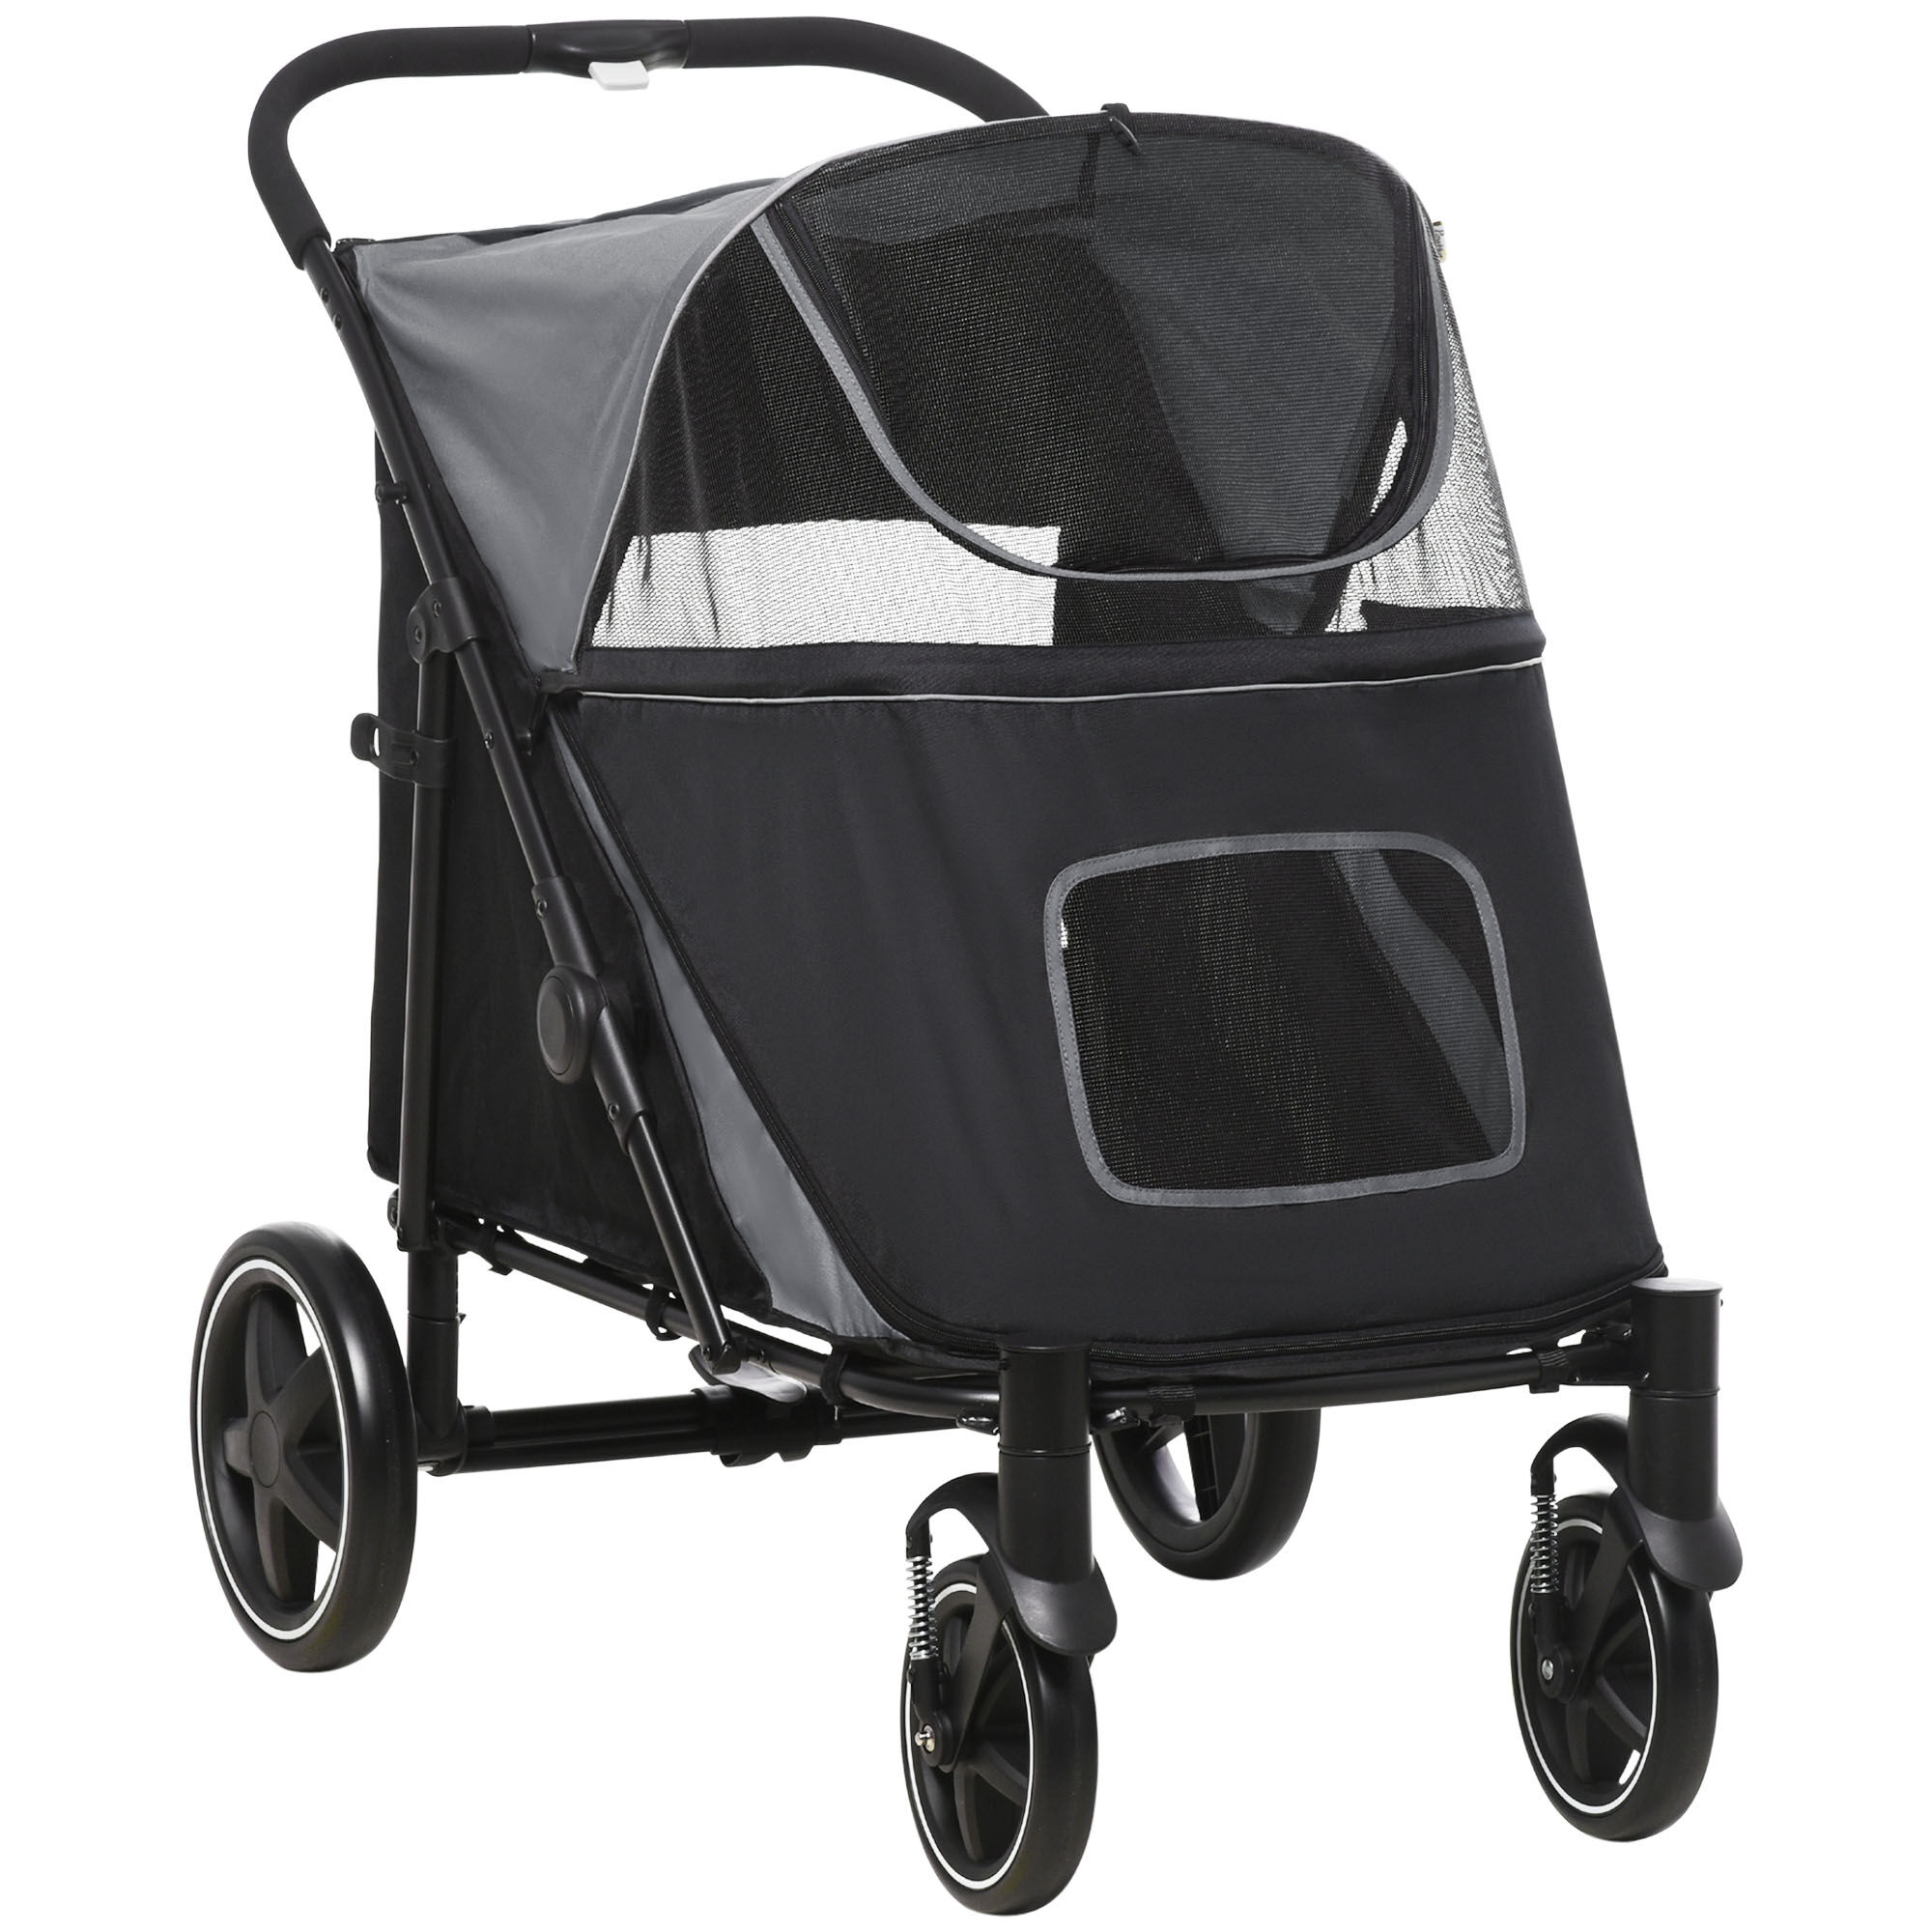 PawHut Pet Stroller Dog Cat Carriage One Click Fold with Universal Front Wheels Shock Absorber Brakes Storage Bags Mesh Window   Aosom.com